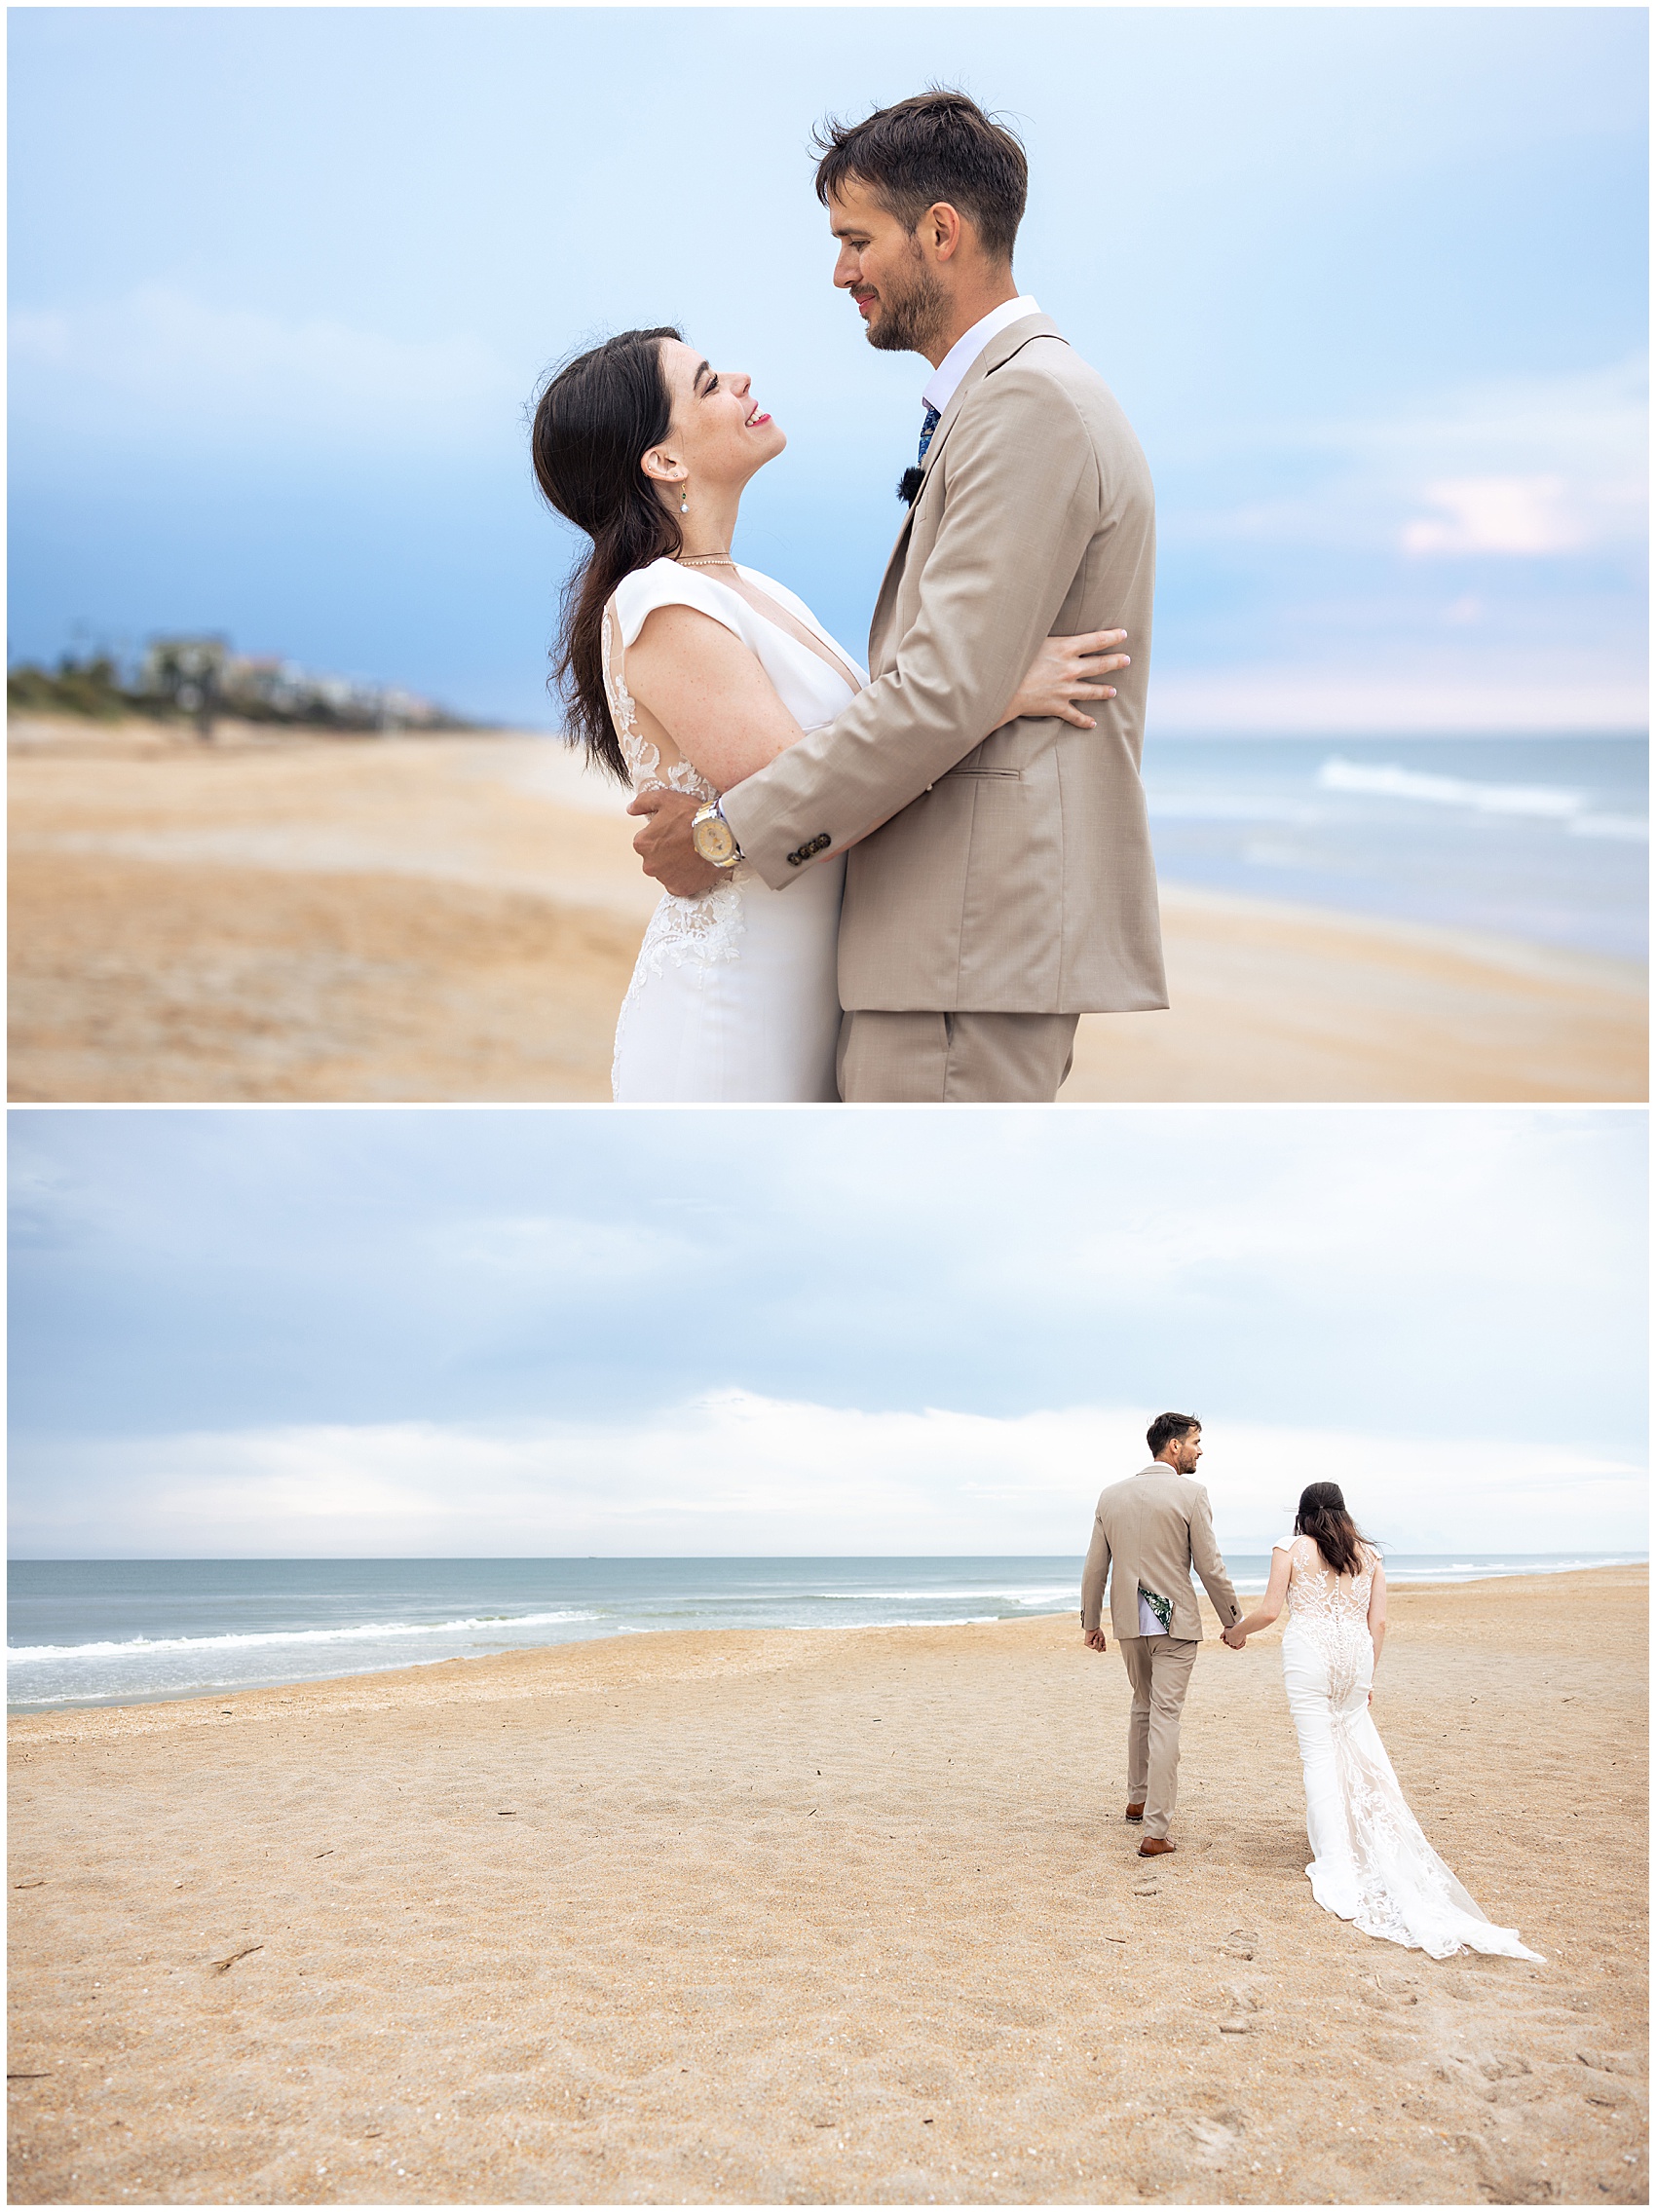 Newlyweds walk hand in hand up the beach in a tan suit and lace dress